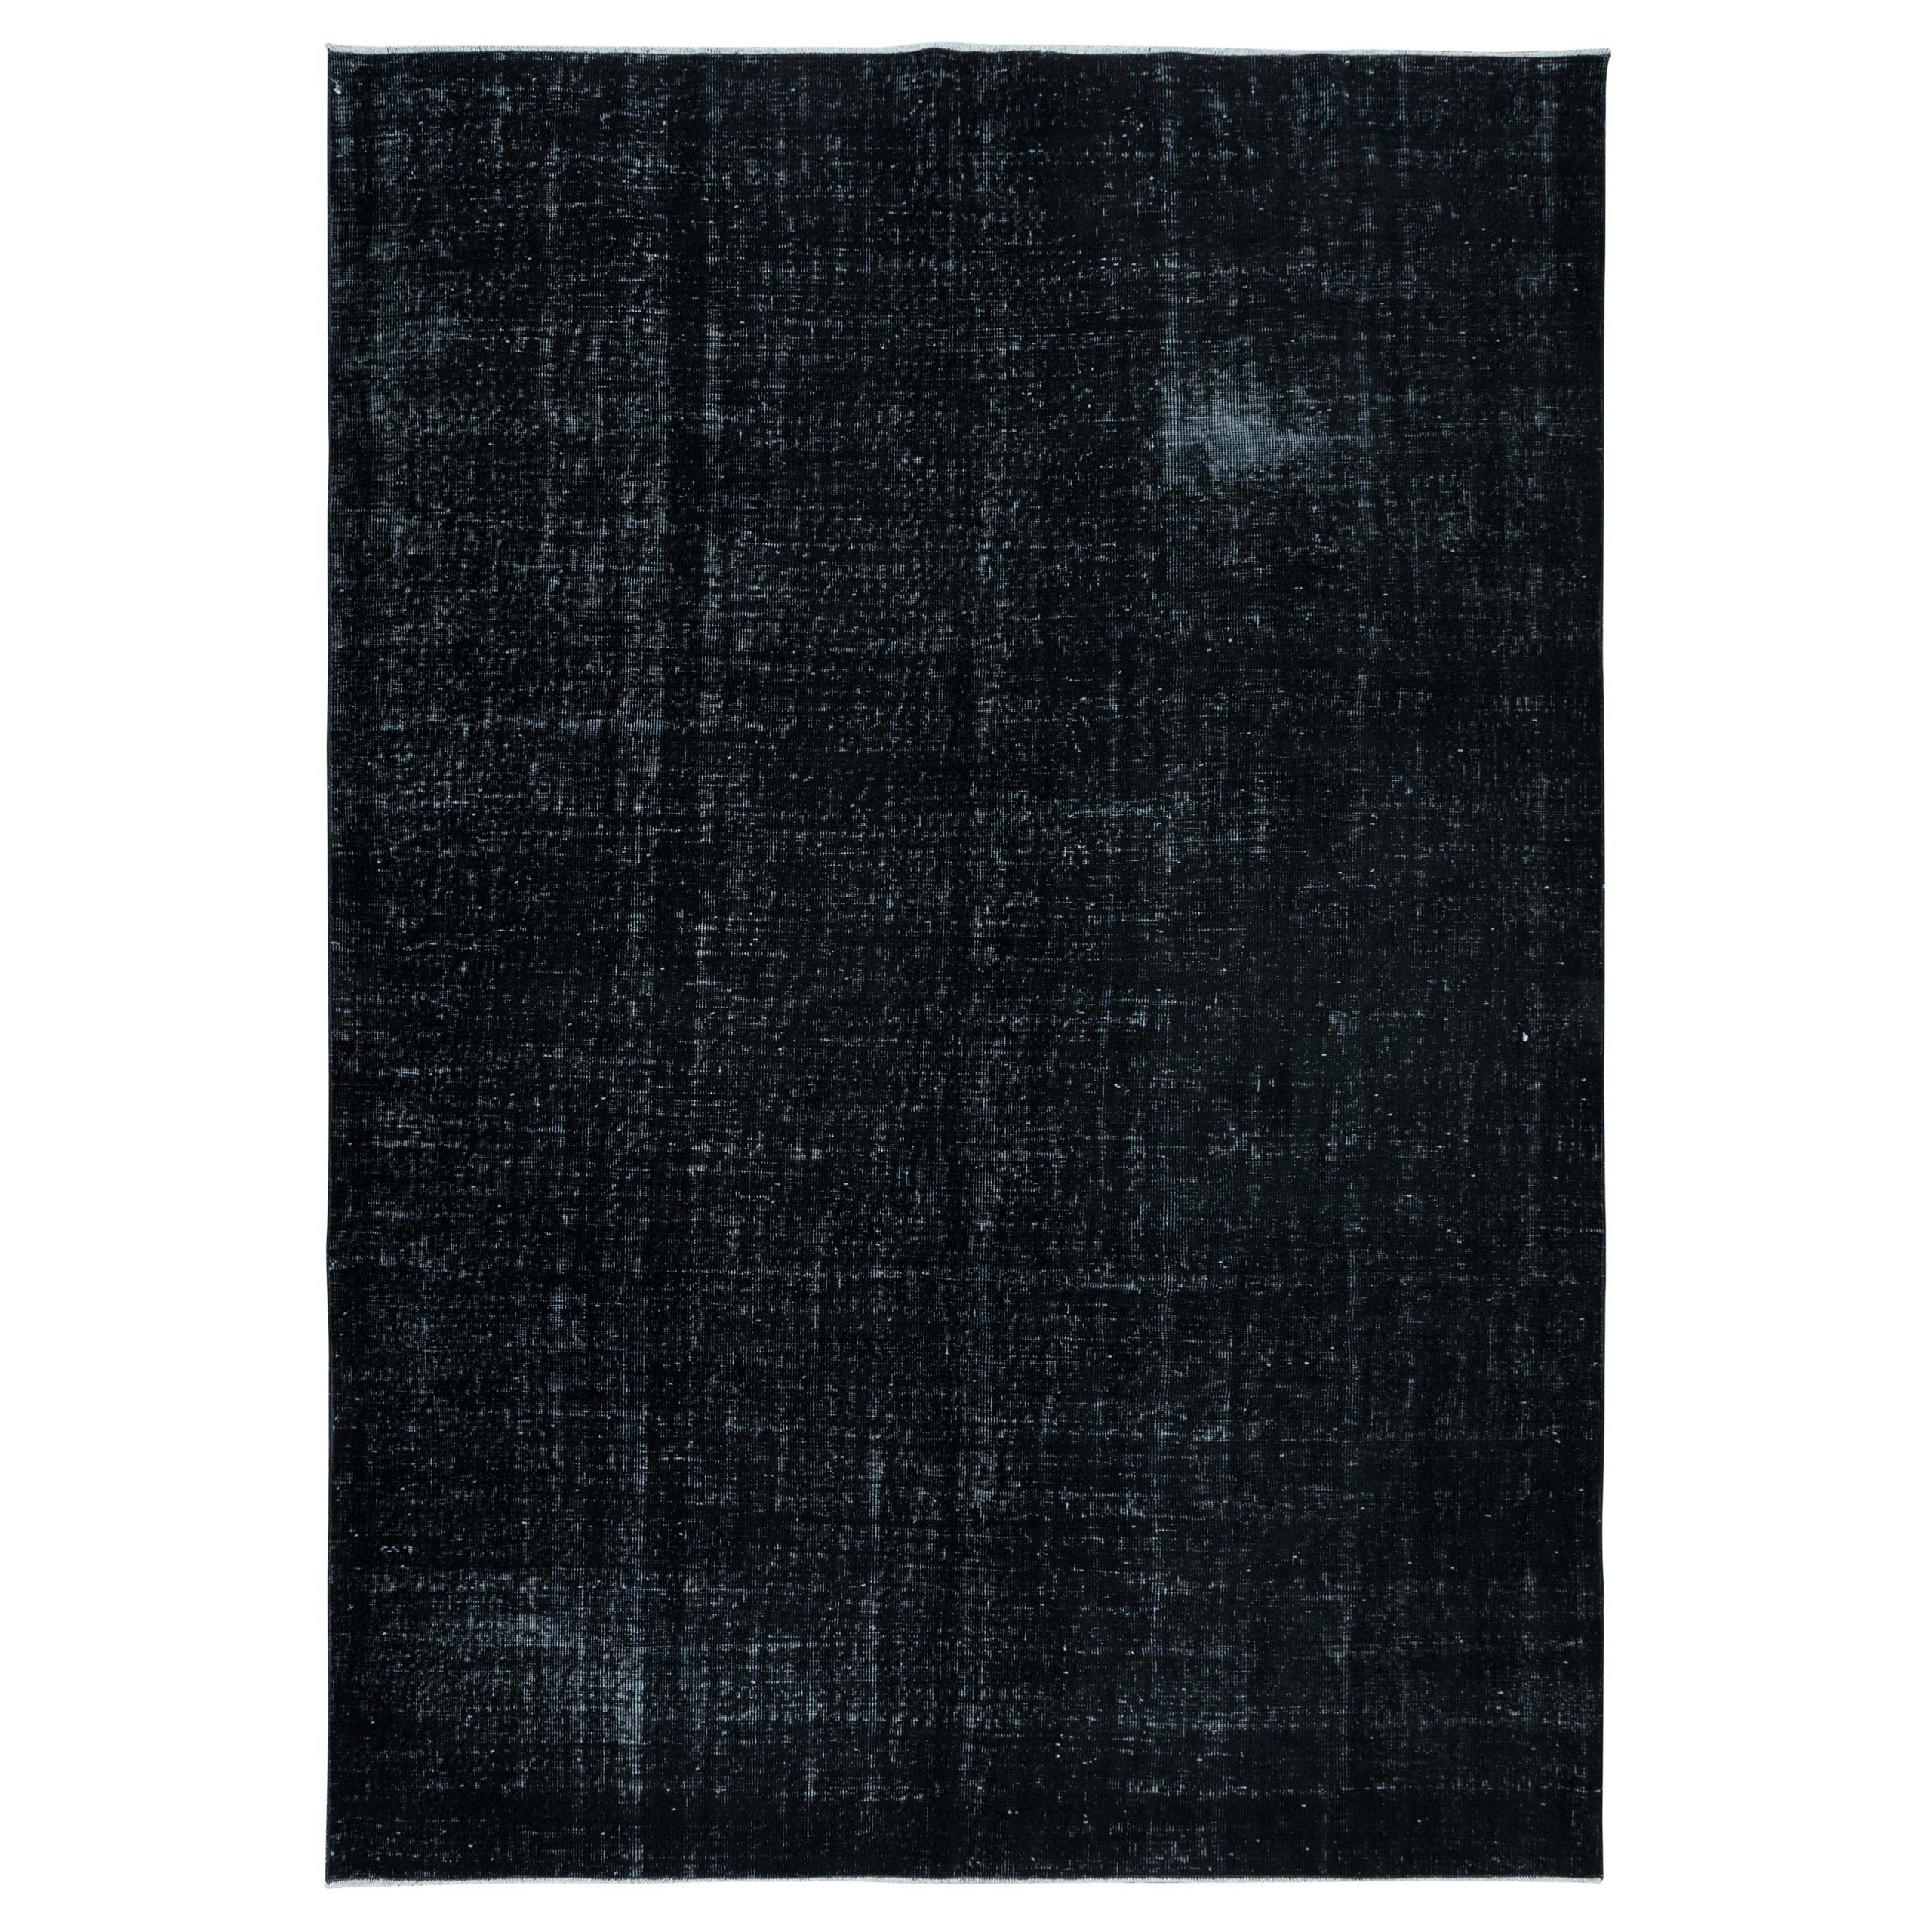 6.8x10 Ft Modern Large Area Rug in Black for Living Room, Hand-Knotted in Turkey